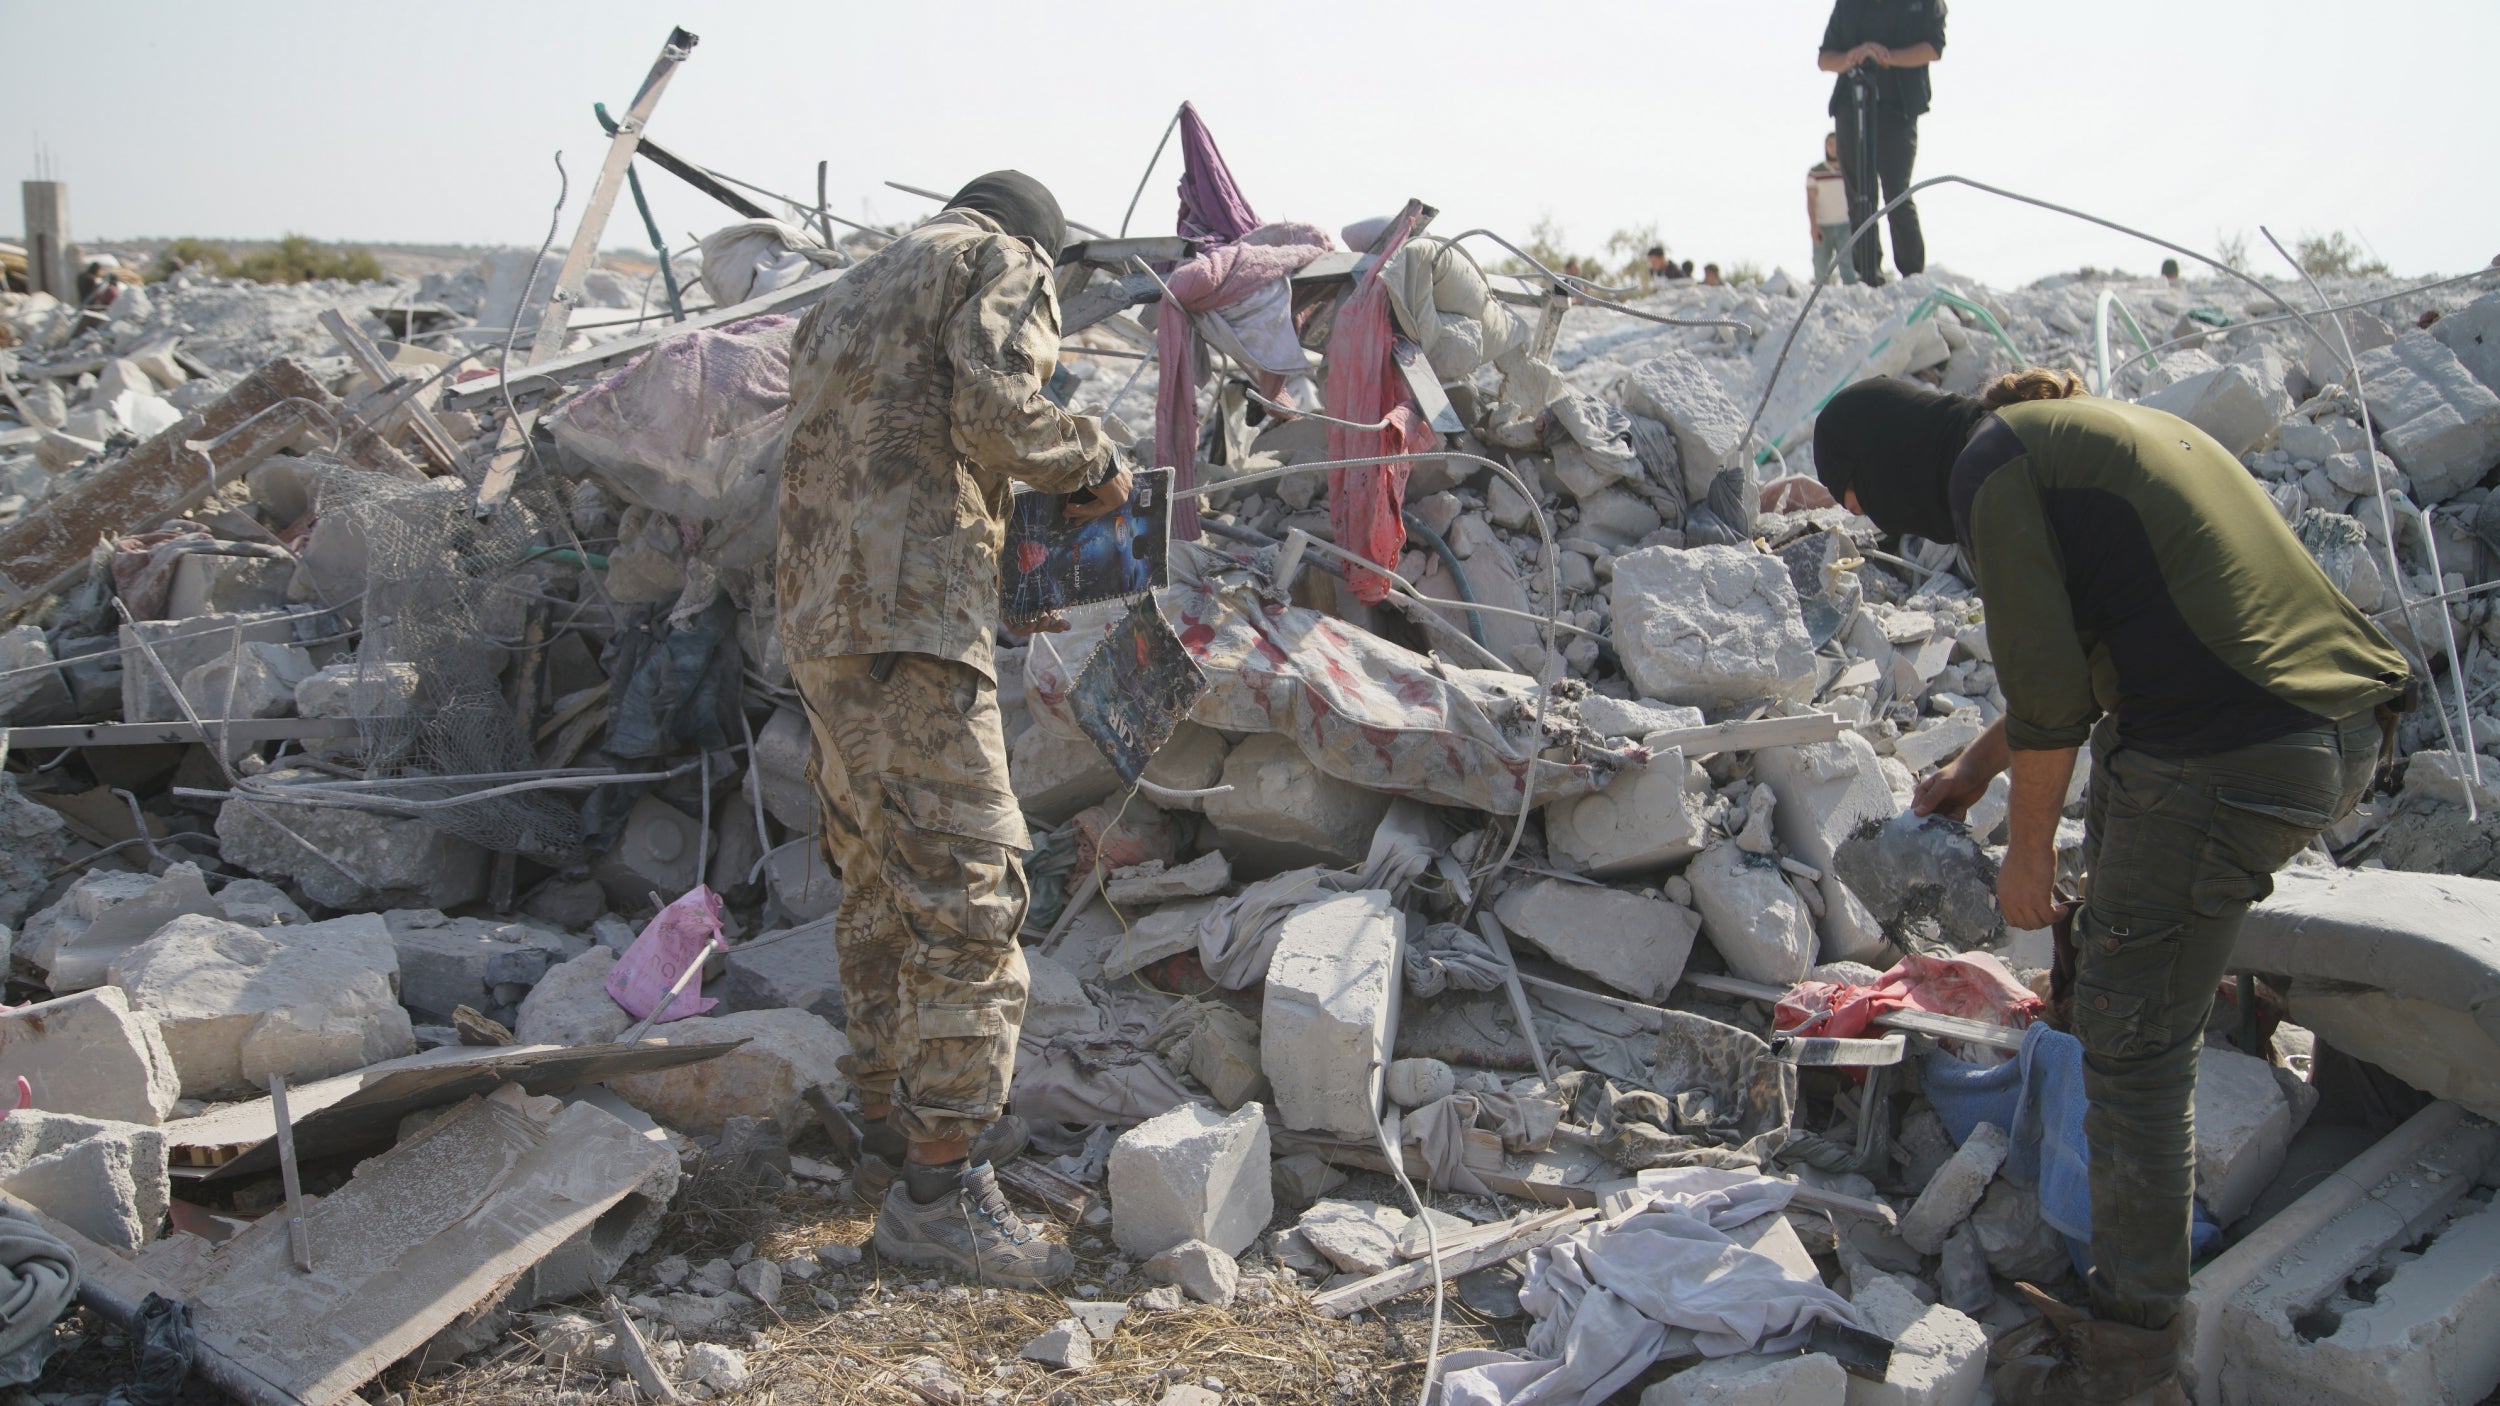 The rubble at the site hit by helicopter gunfire which reportedly killed Abu Baker al-Baghdadi